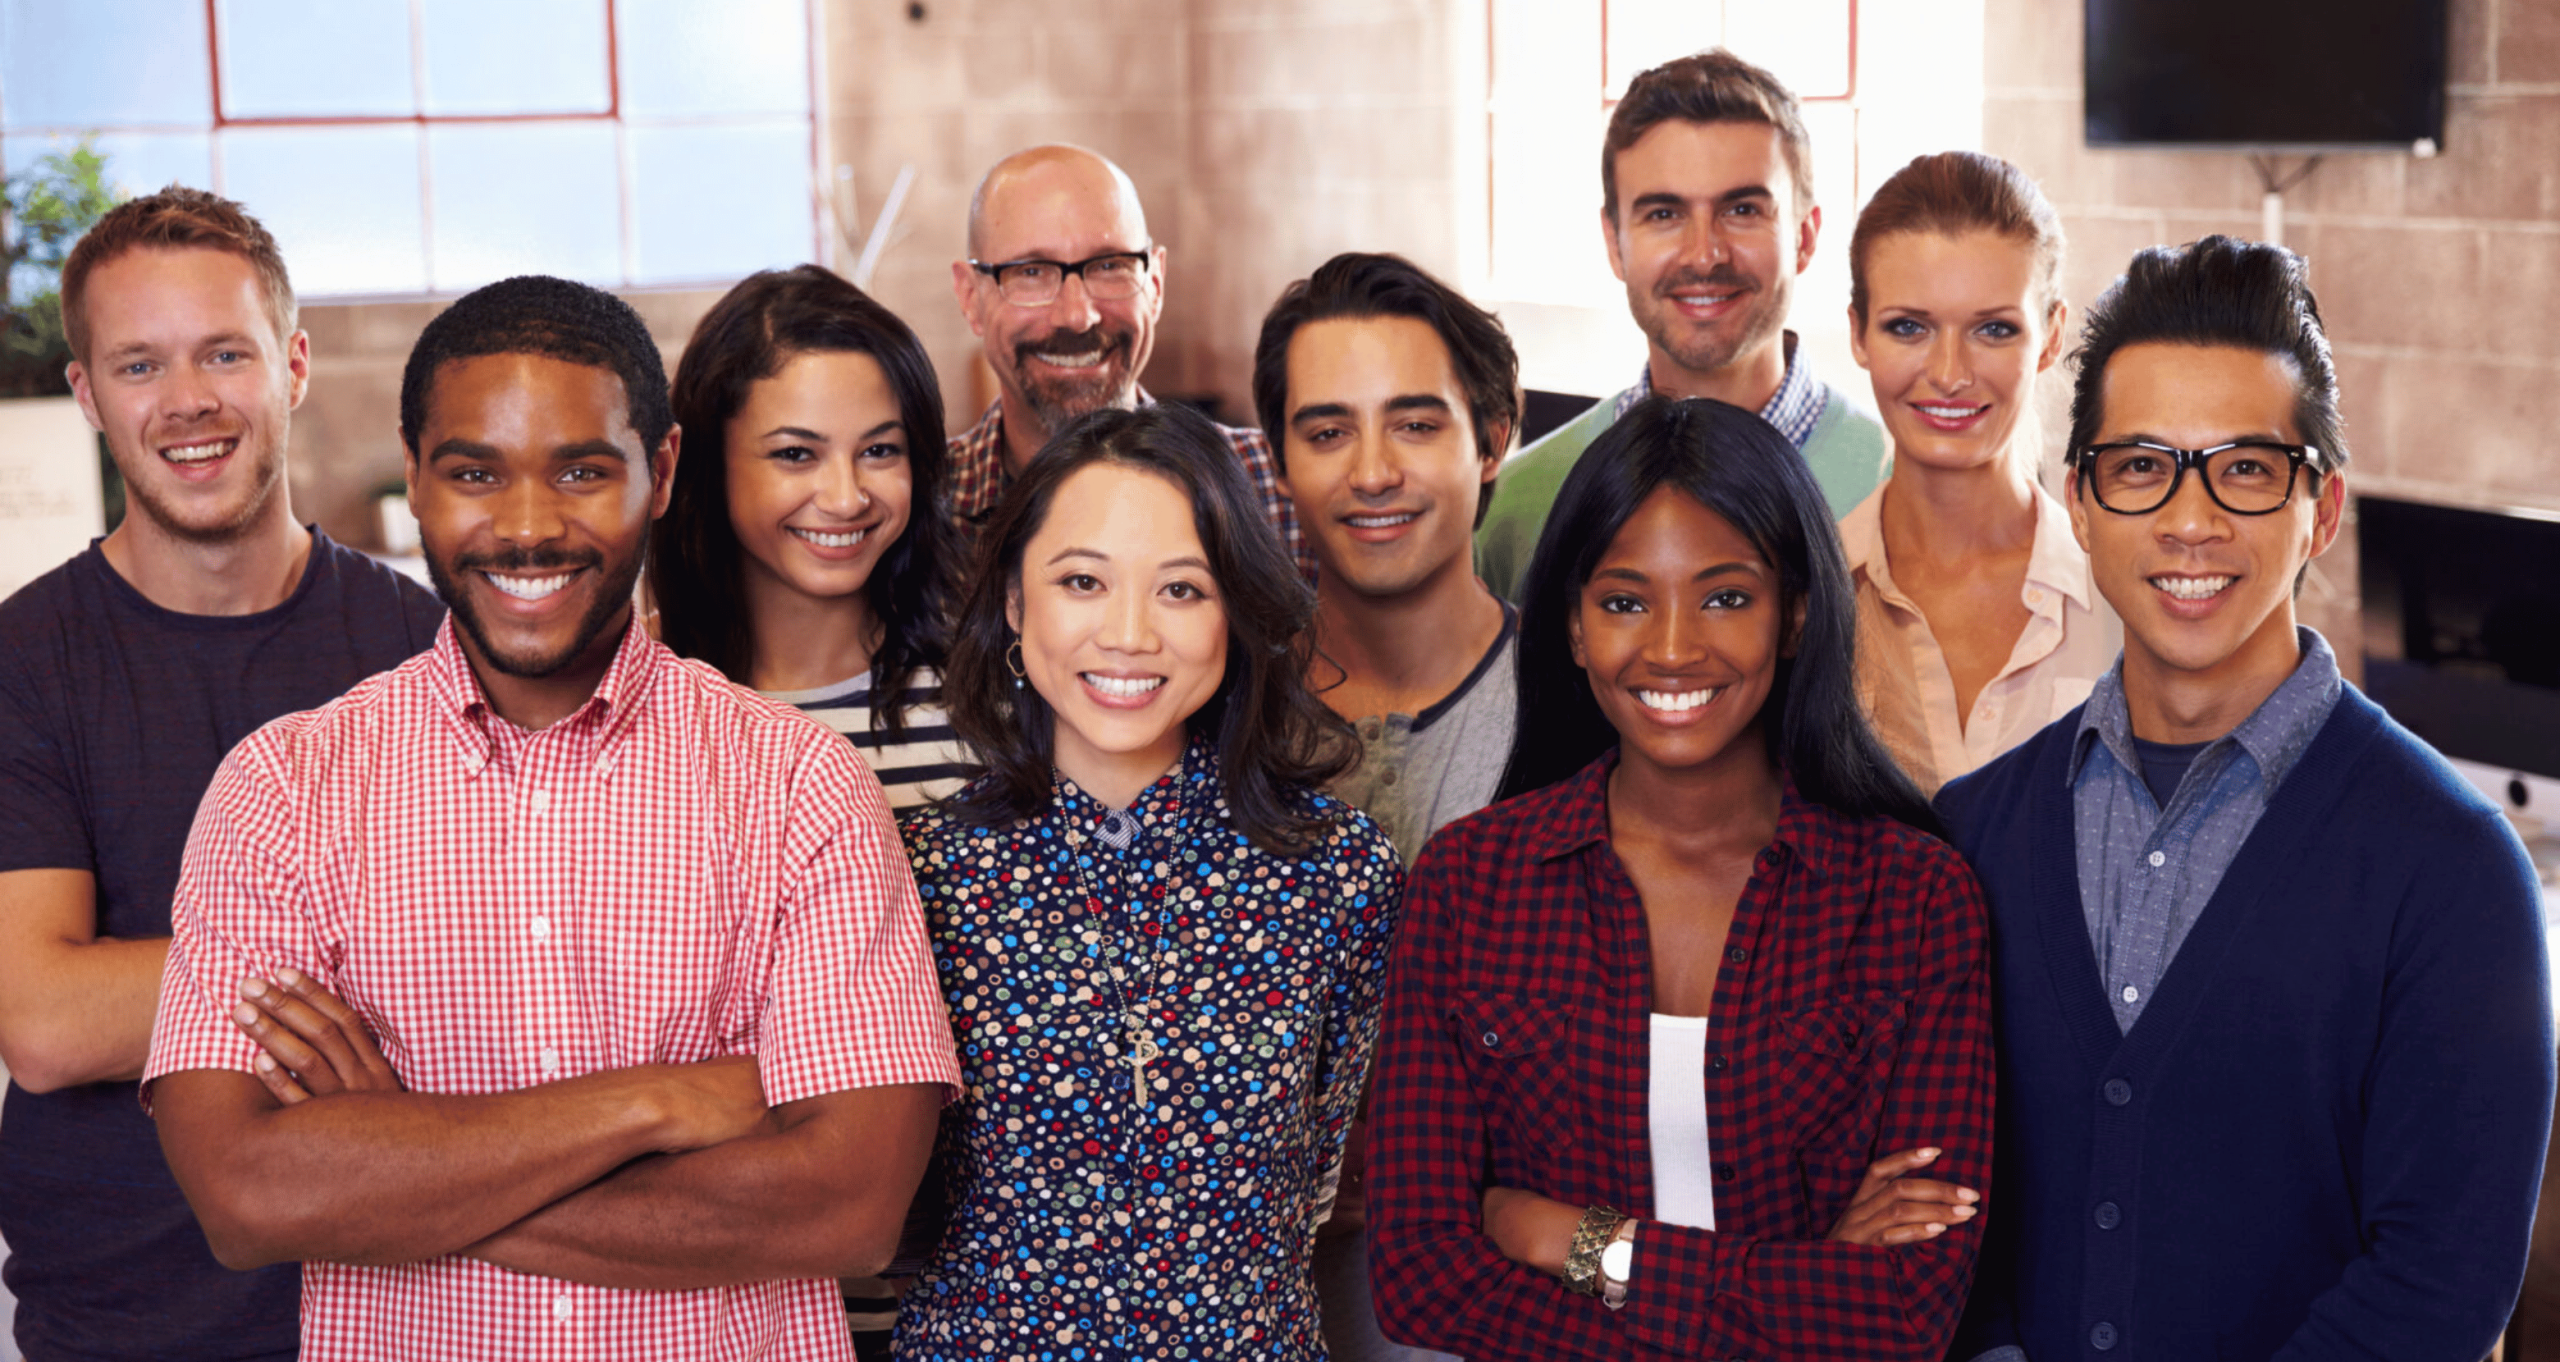 Looking at Employee Benefits Through the Diversity, Equity and Inclusion Lens